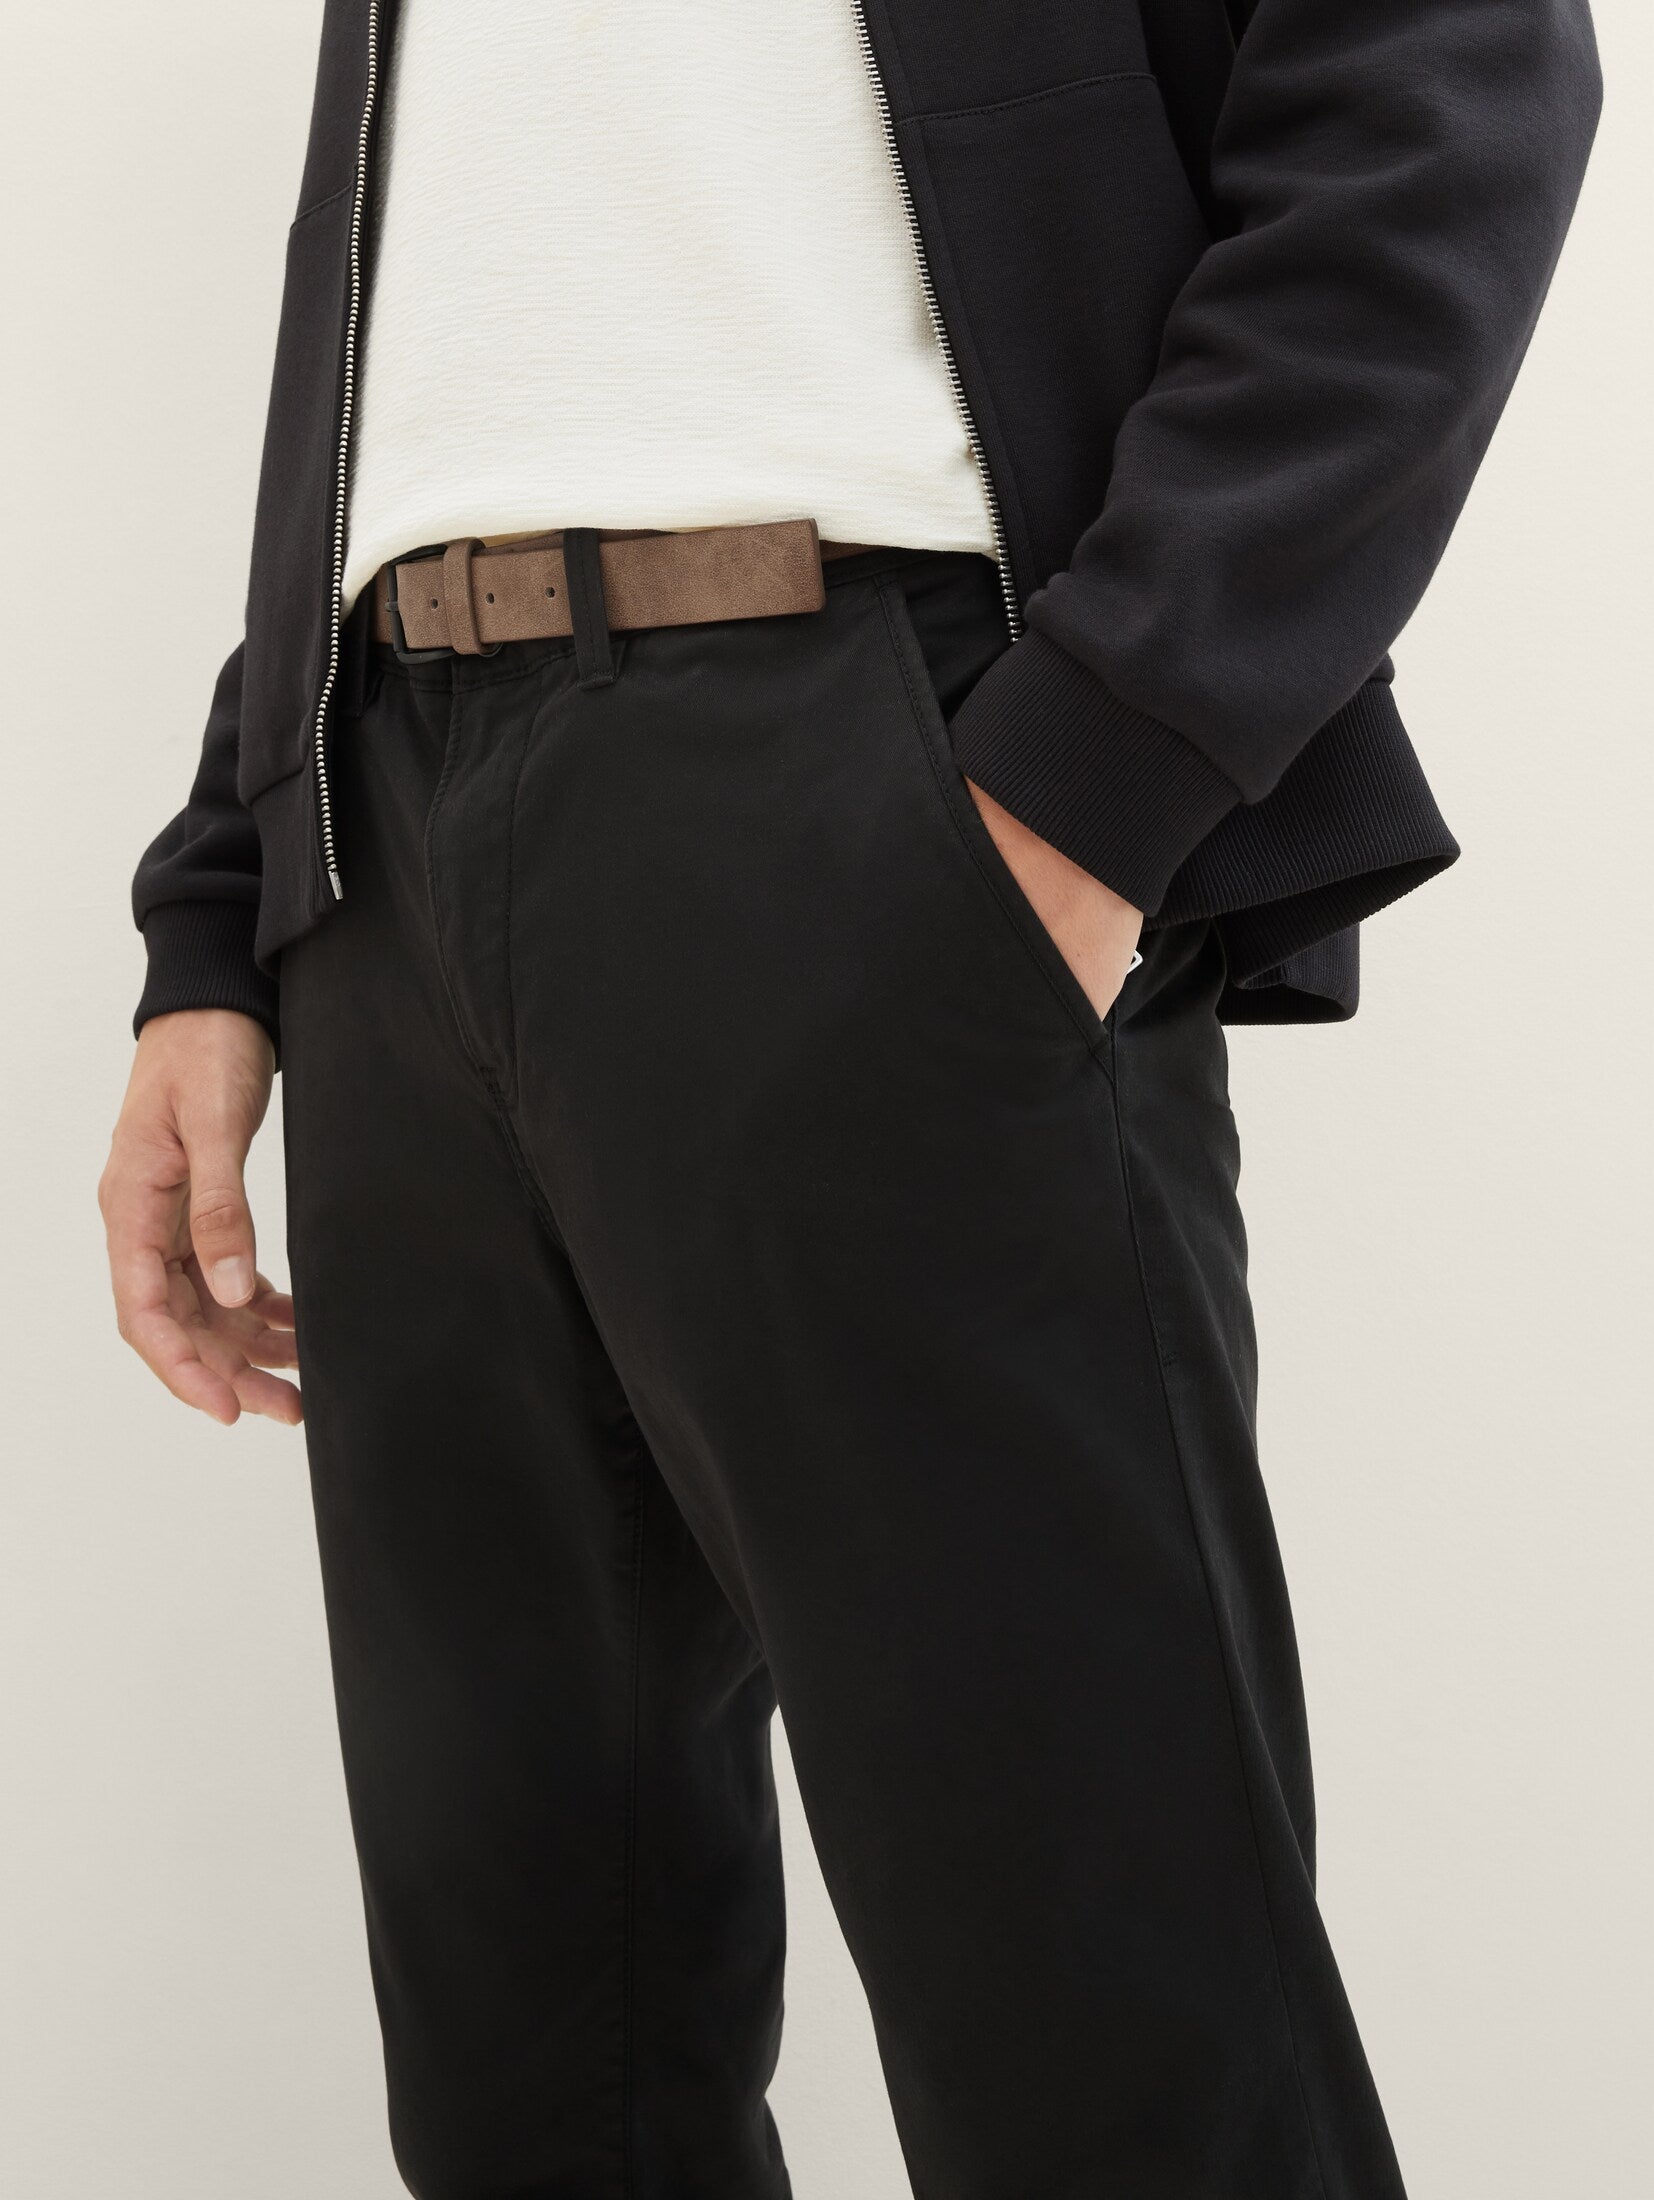 Tom Tailor Black Chino With A Belt